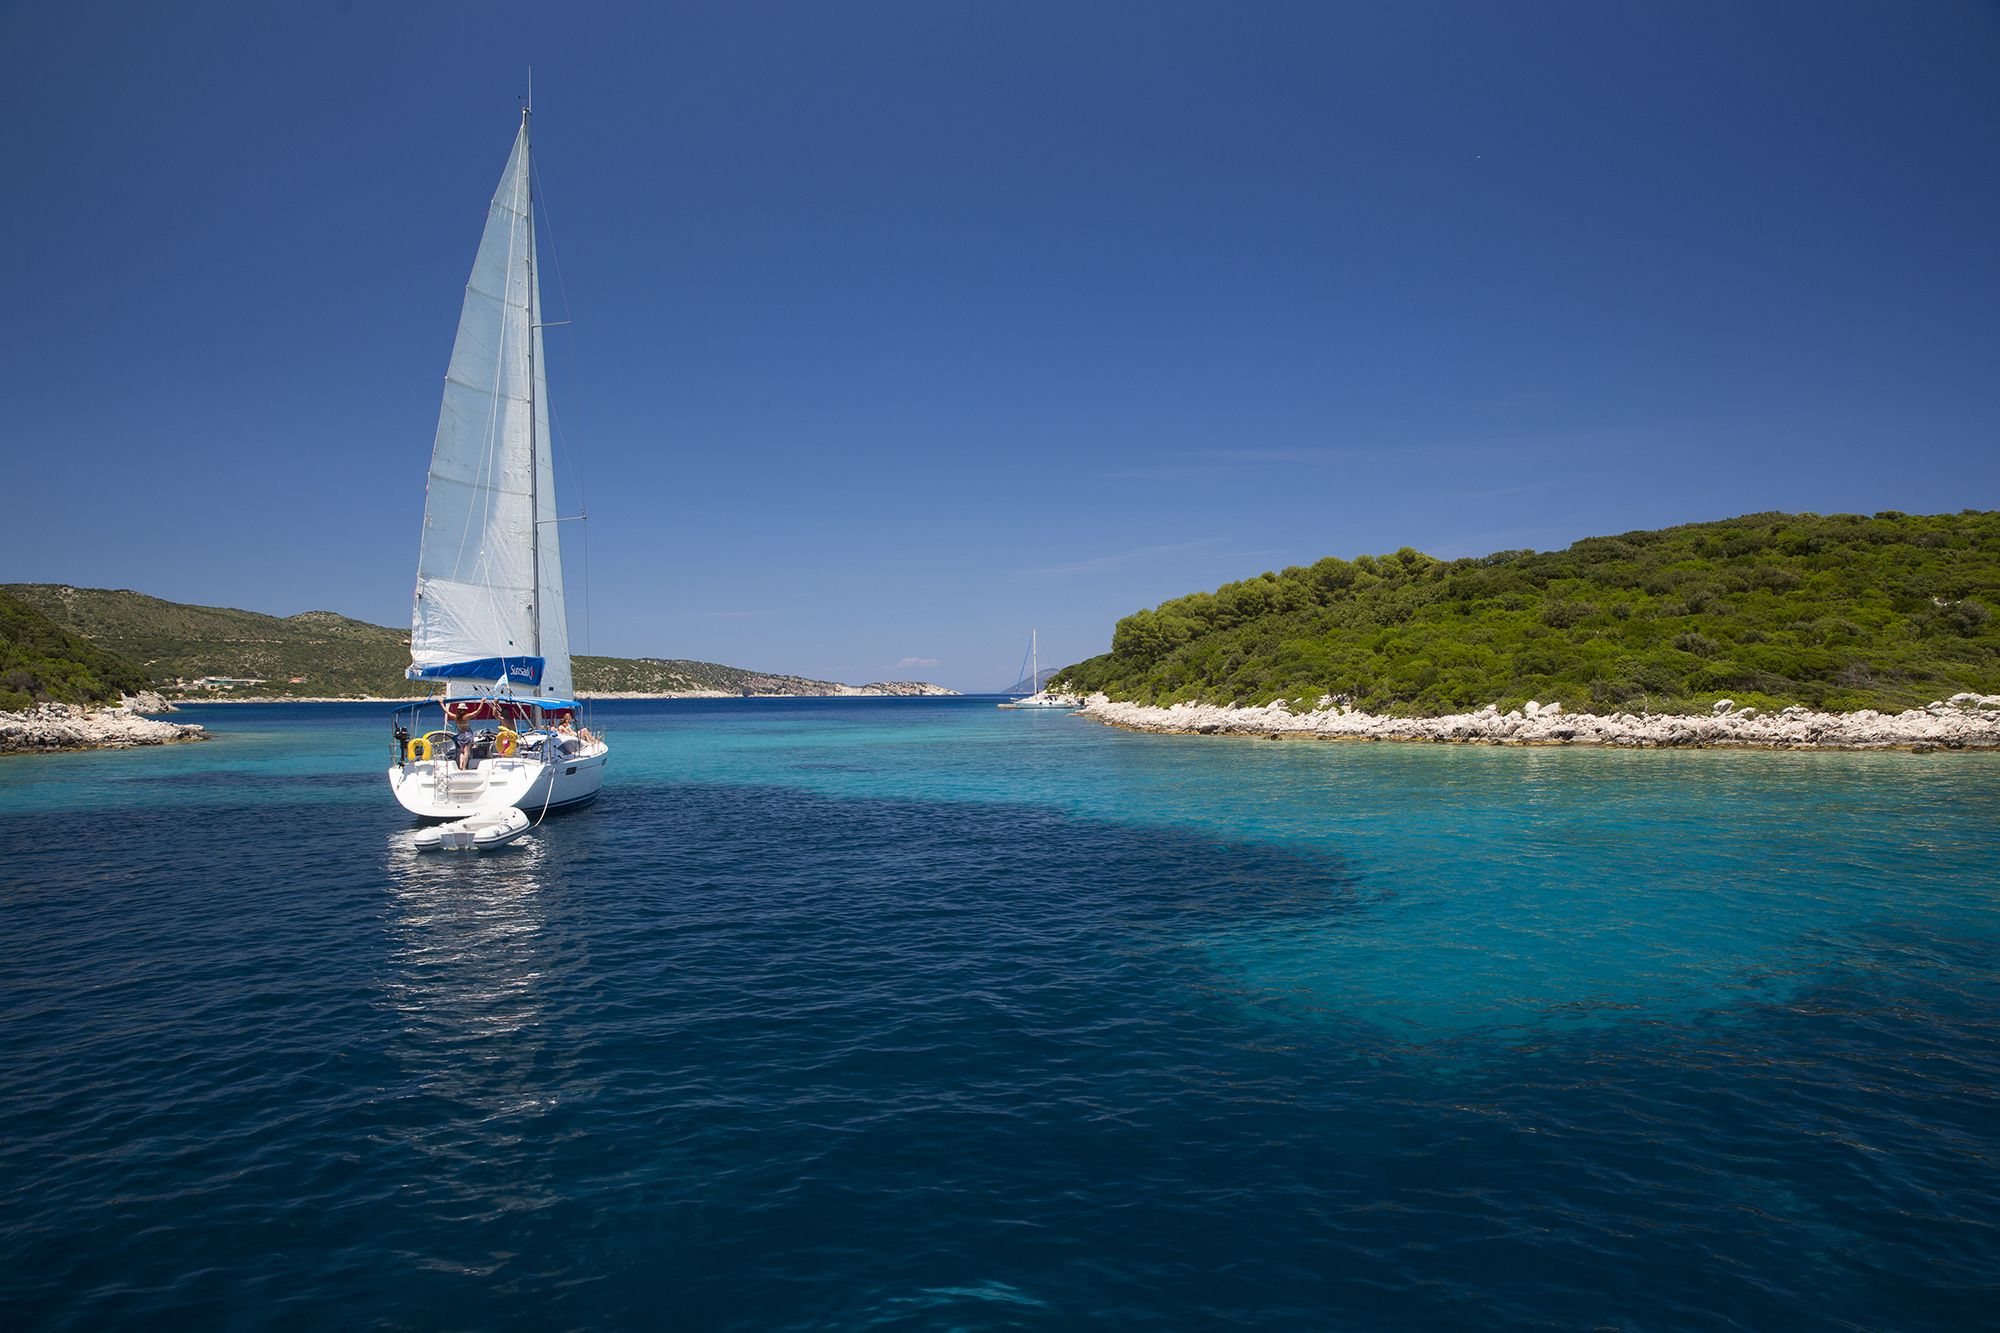 A Sunsail charter vessel on the Ionian Sea. (Courtesy of Sunsail Yacht Charters)